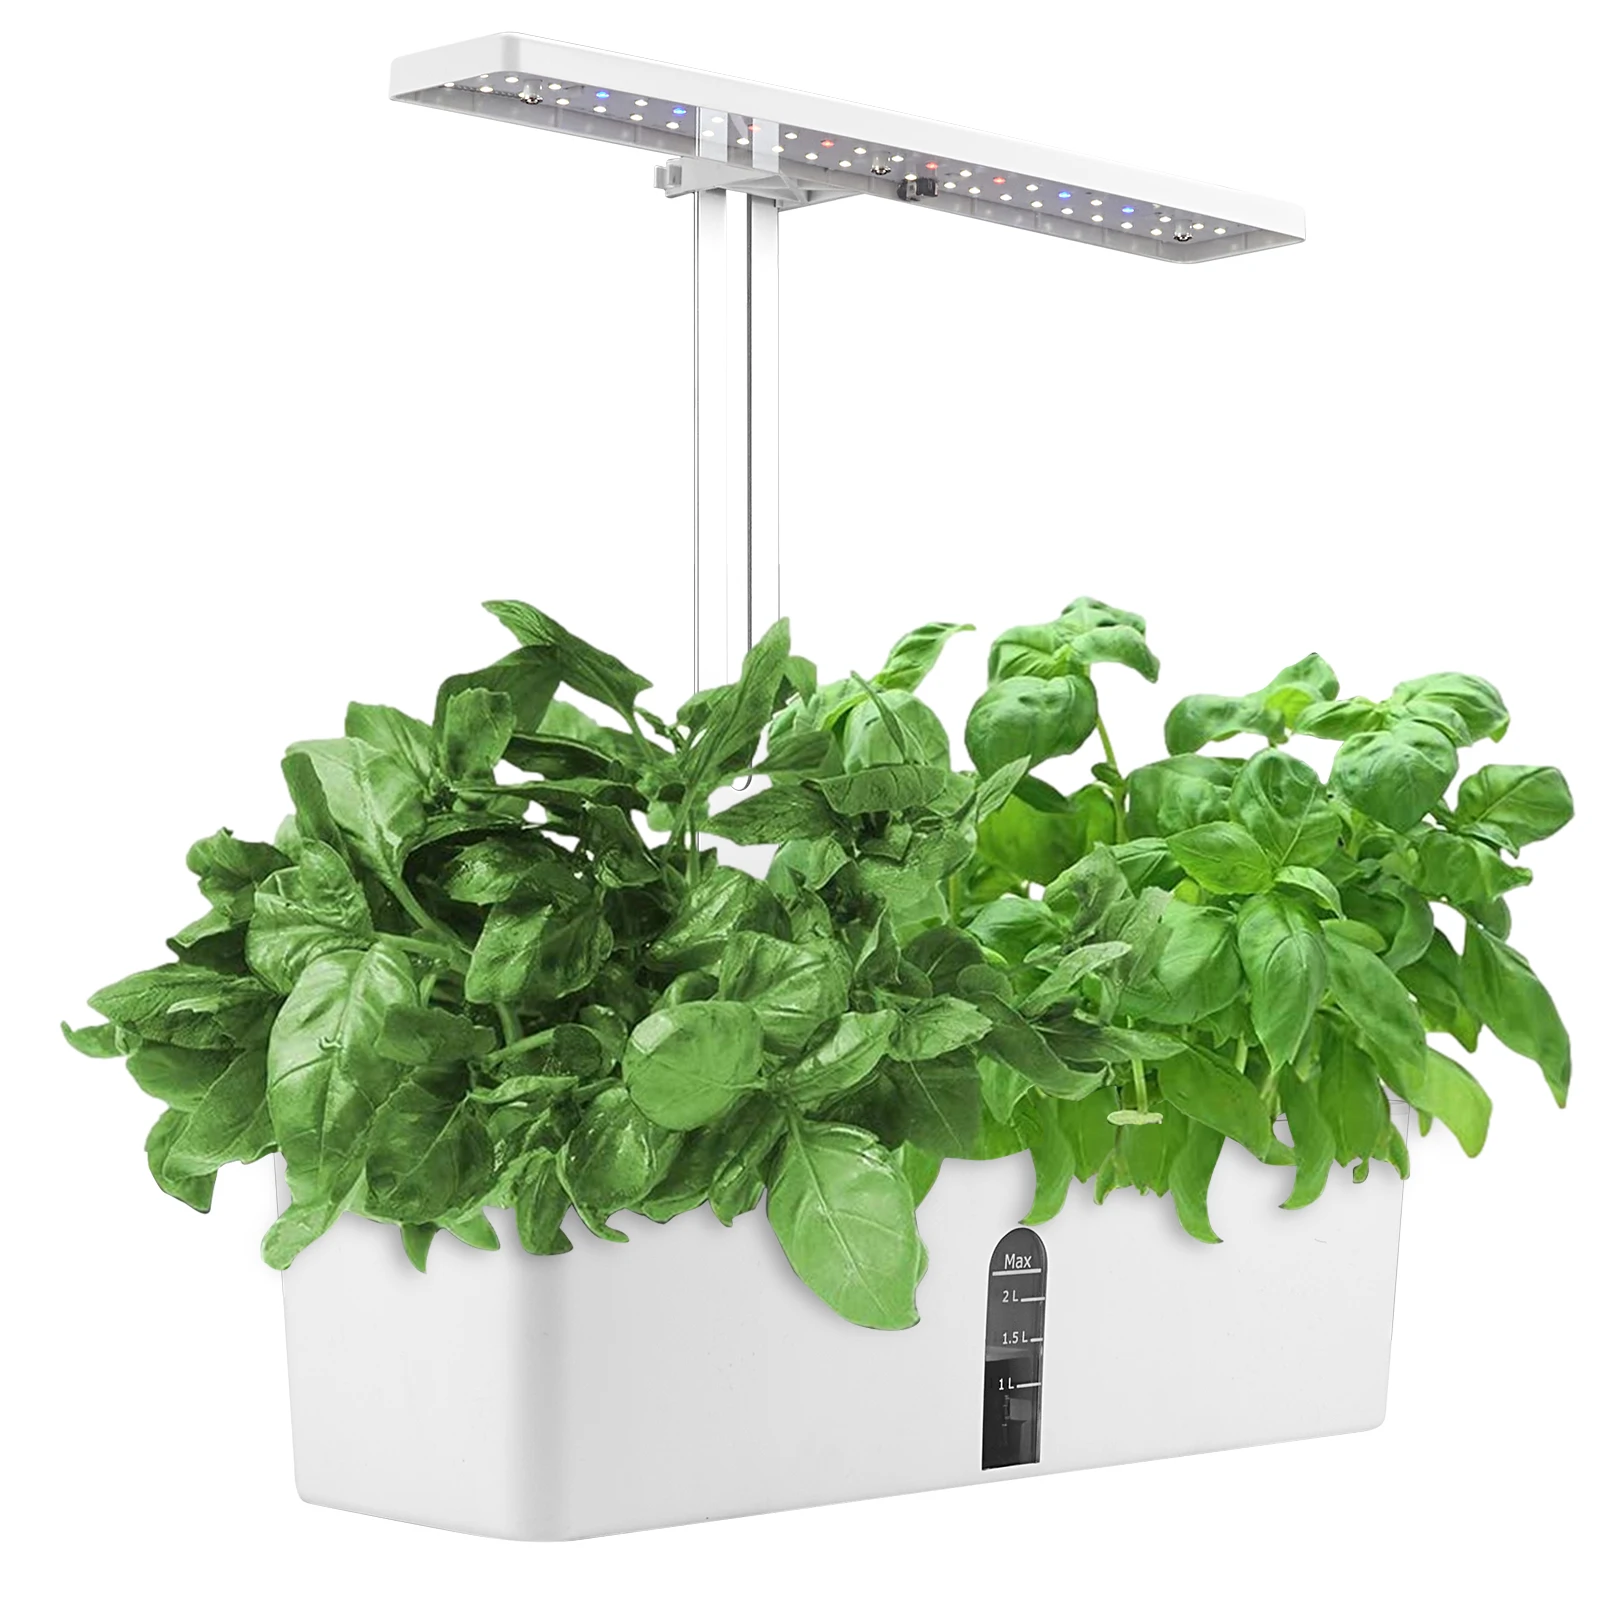 Hydroponics Growing System Intelligent Hydroponic Planter With Adjustable LED Light Hydroponic Germination System enlarge